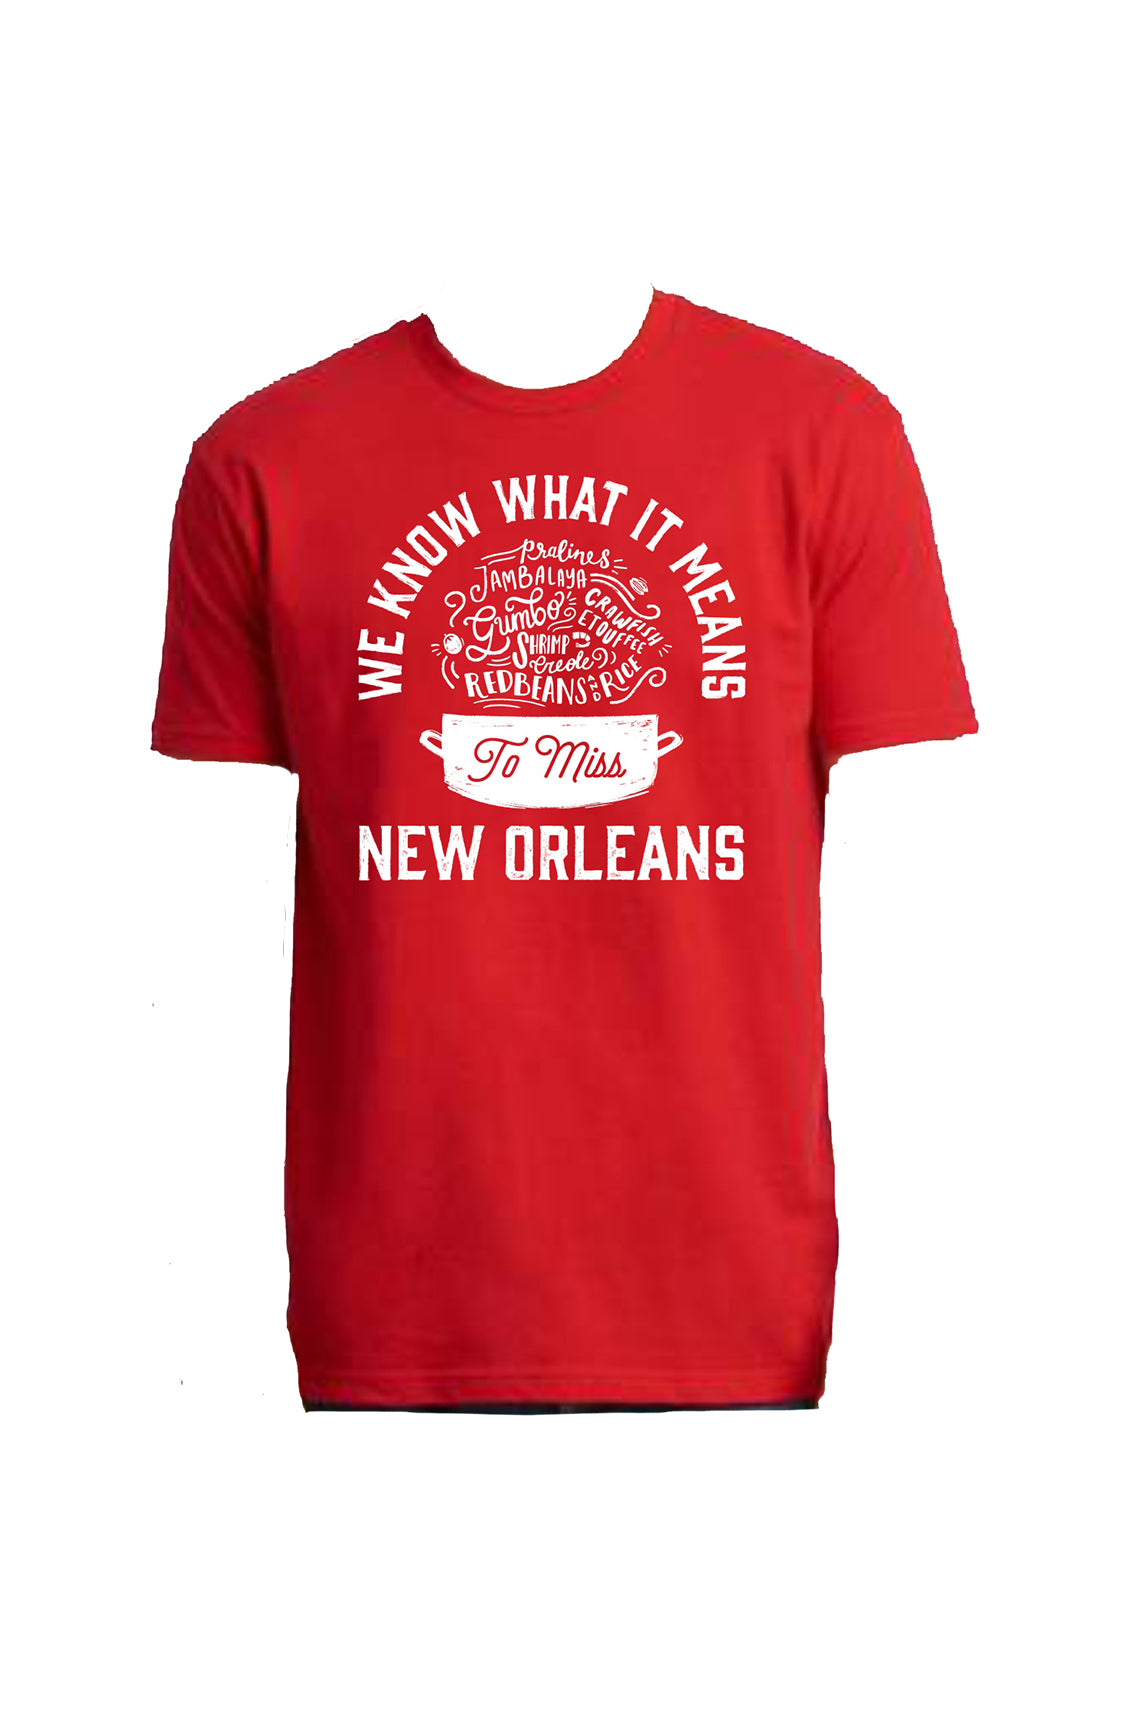 We Know What It Means To Miss New Orleans